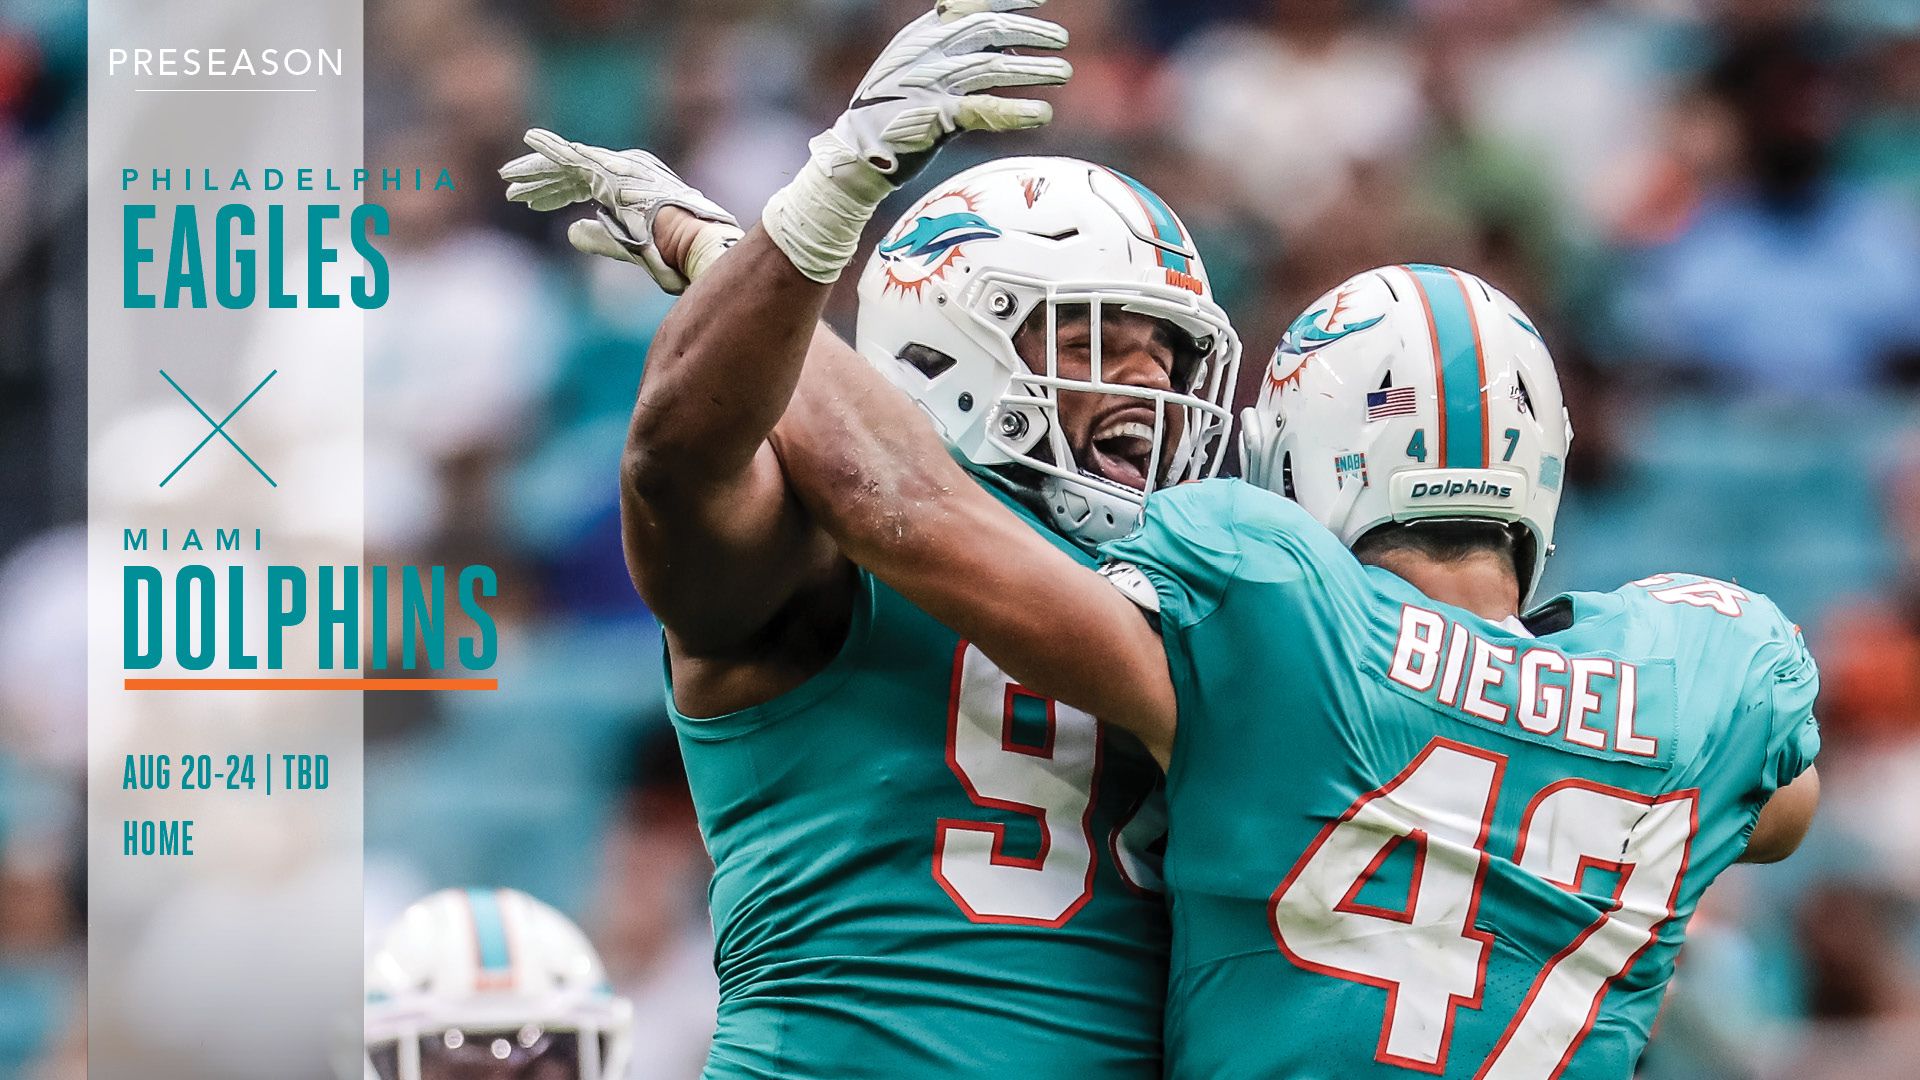 Dolphins Single Game Tickets | Miami Dolphins - dolphins.com